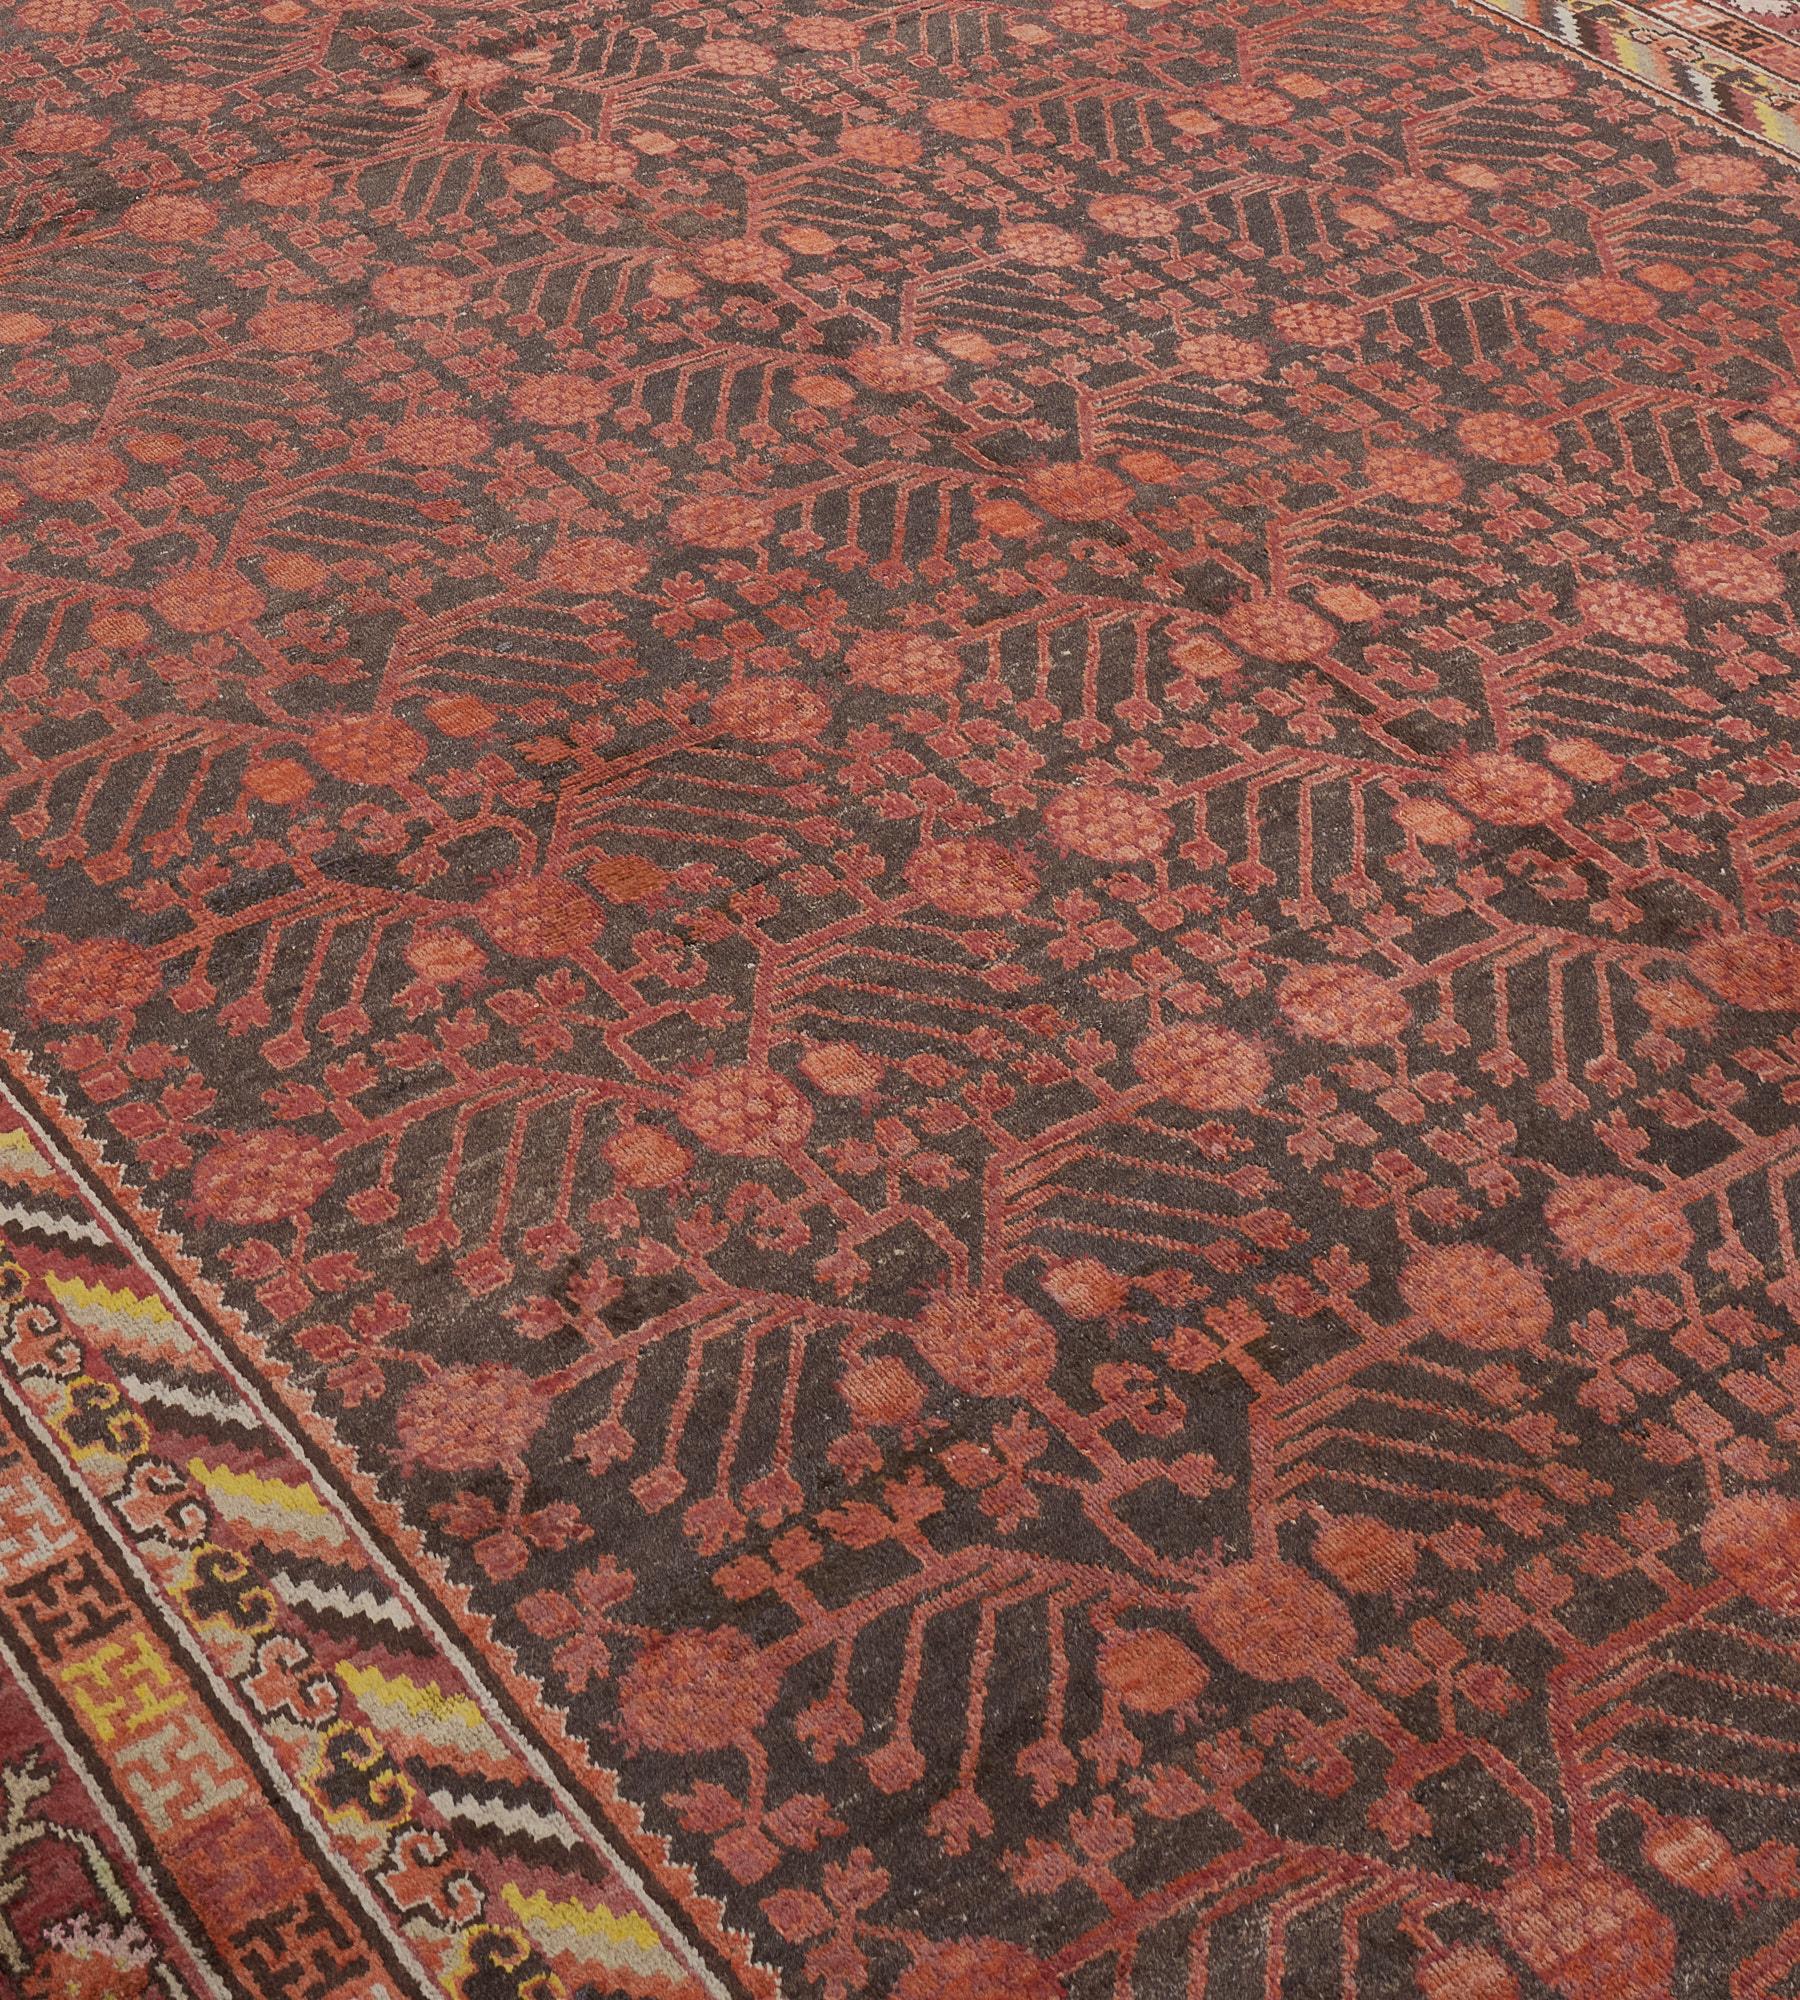 This antique, circa 1900, Khotan rug has a mole-brown field with an overall dense terracotta-red pomegranate vine forming three columns issuing angular floral vine stems, in a narrow border of linked T-shaped motifs forming polychrome open squares